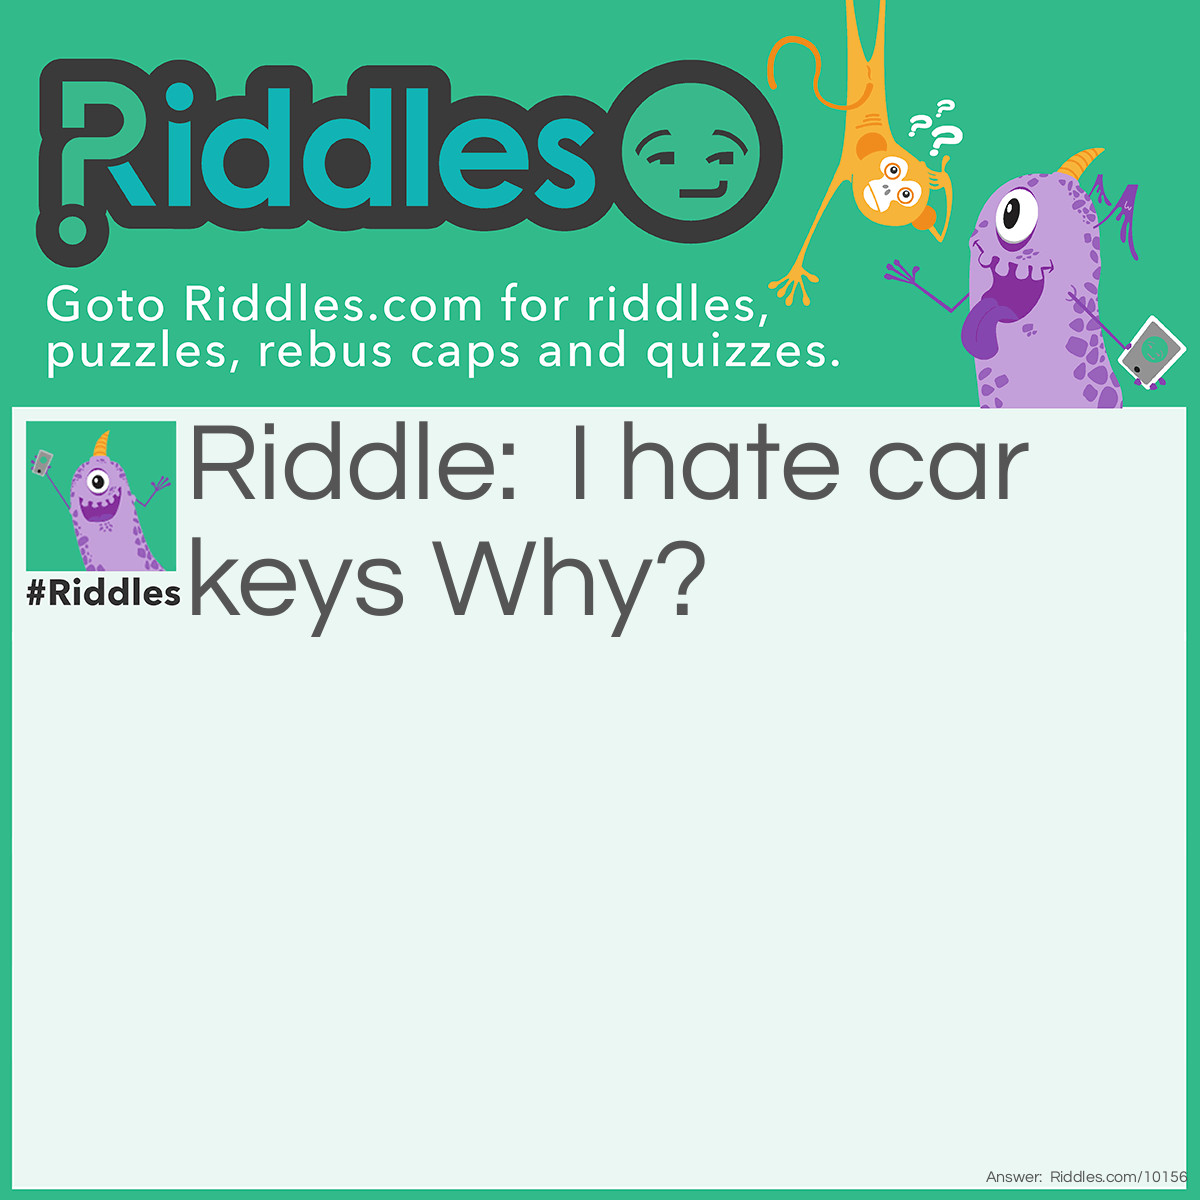 Riddle: I hate car keys Why? Answer: There always starting something